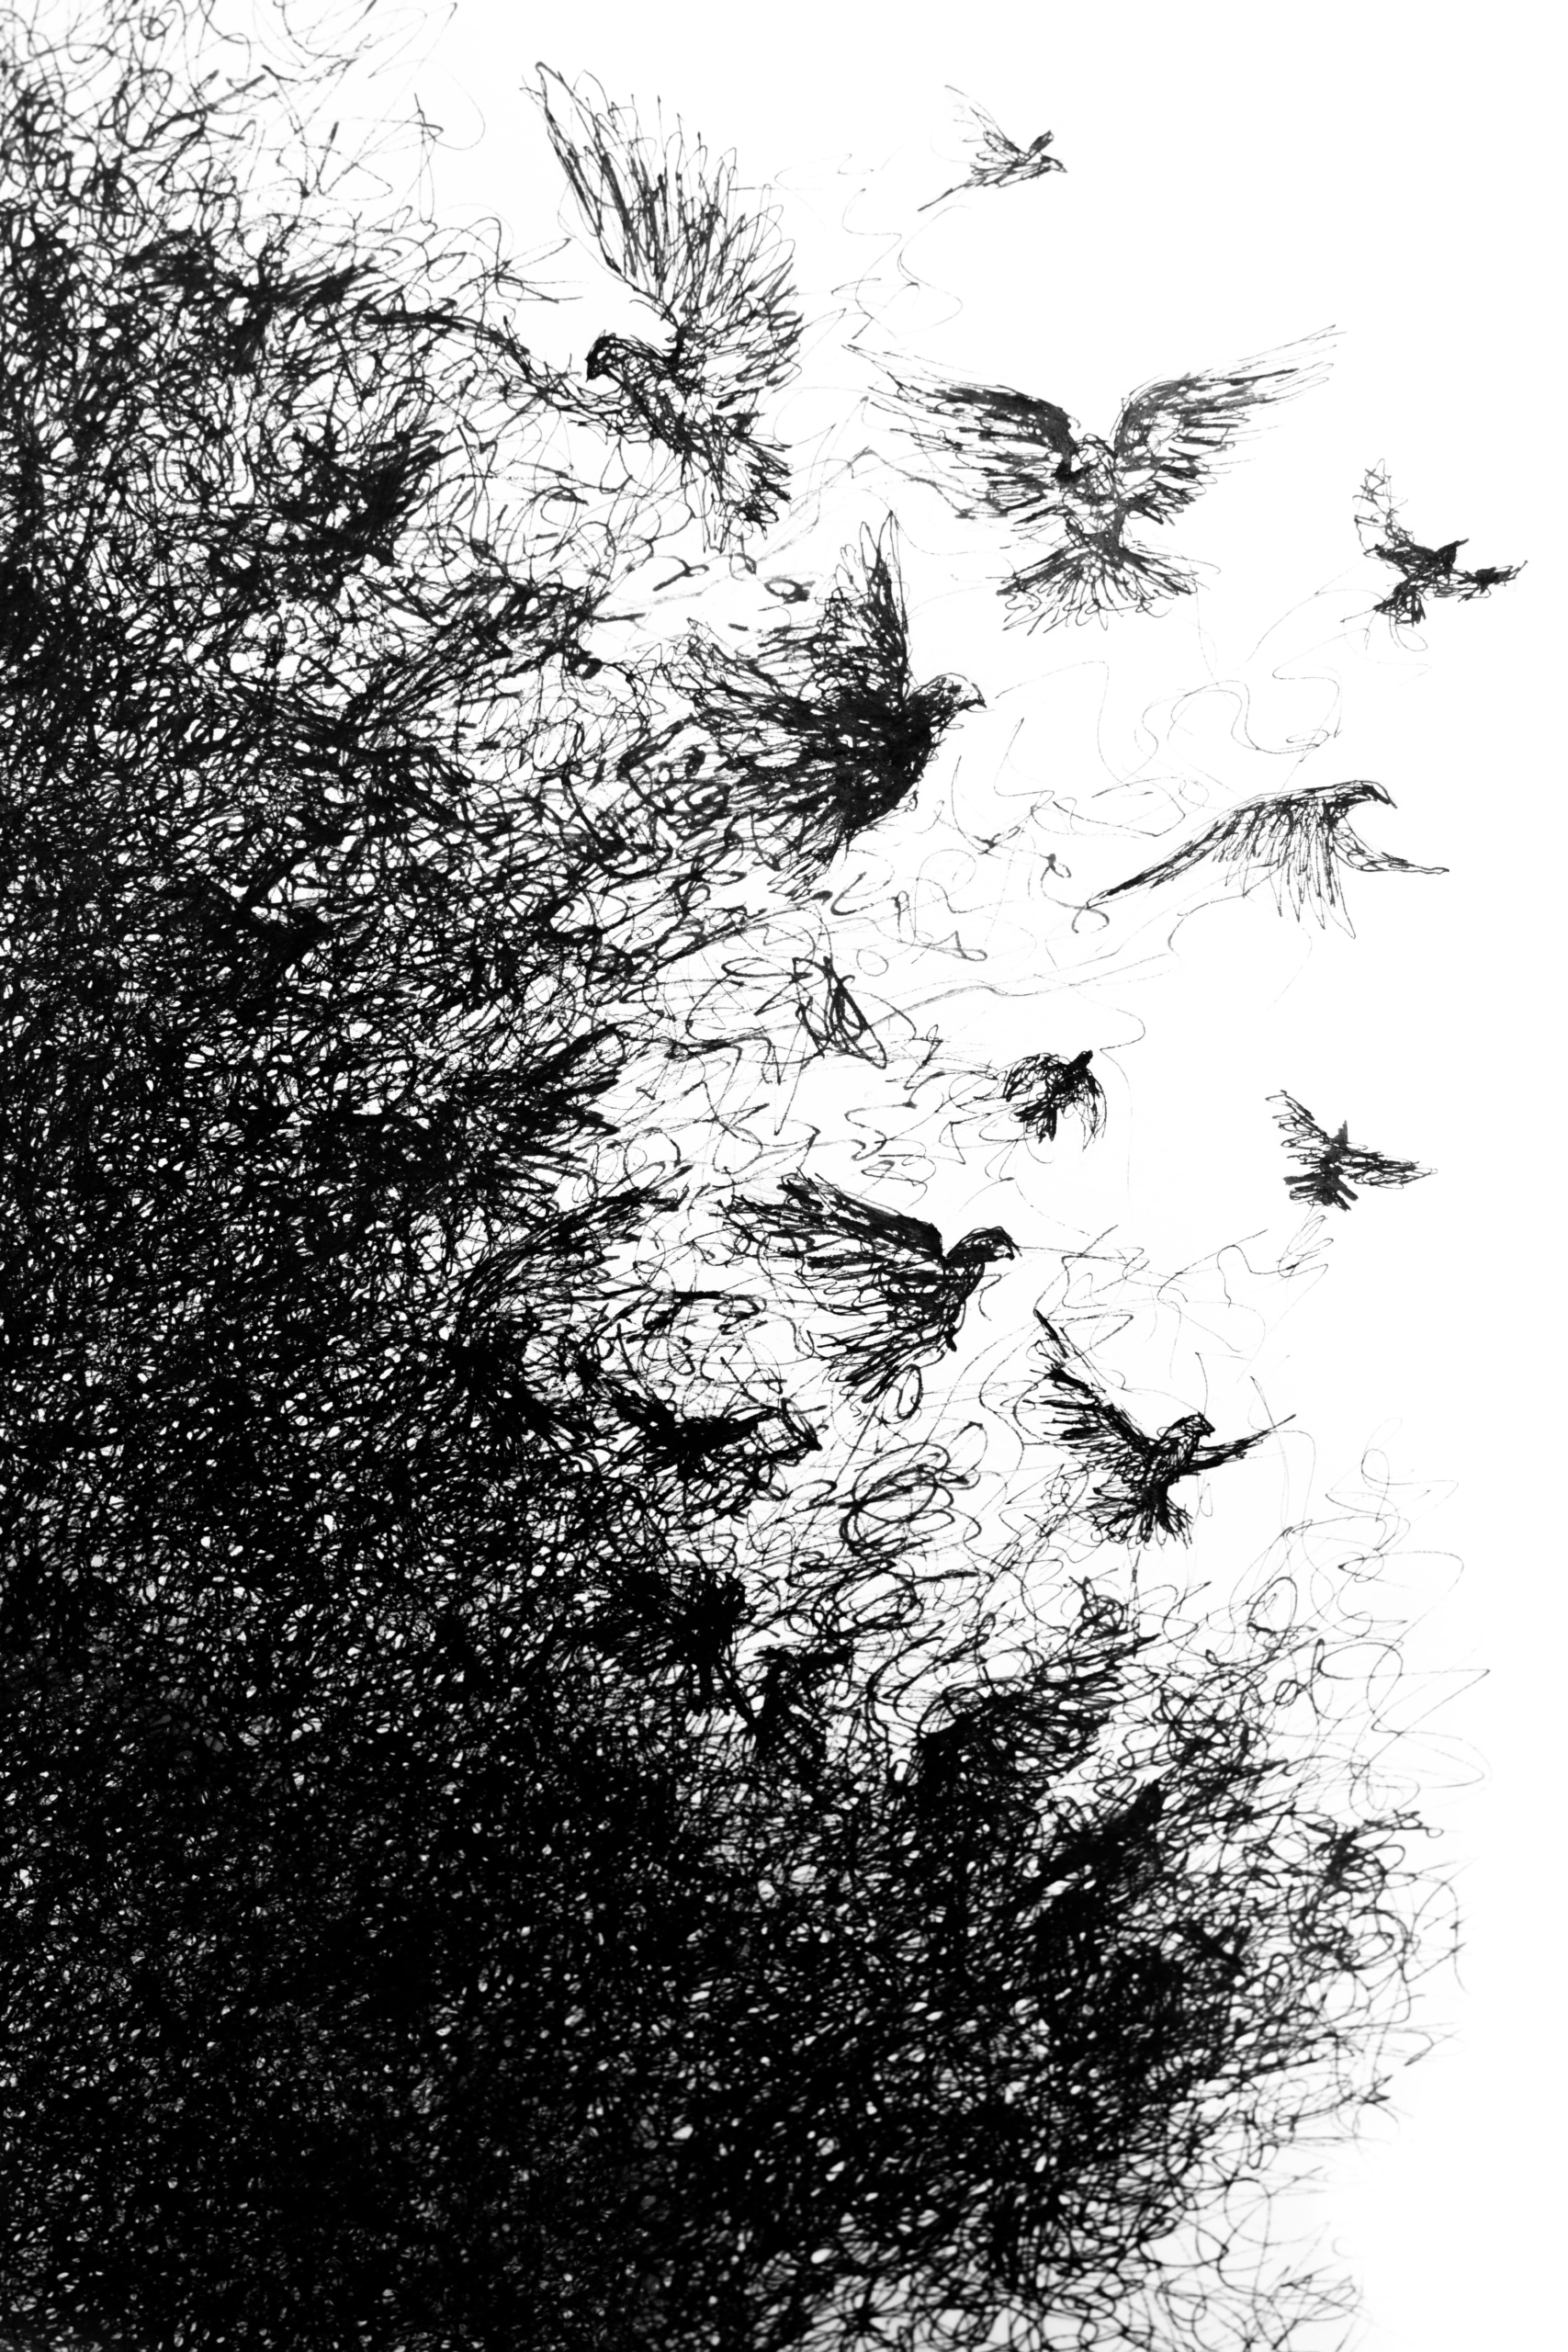 A drawing of birds depicting "the Host" Scottish Monster